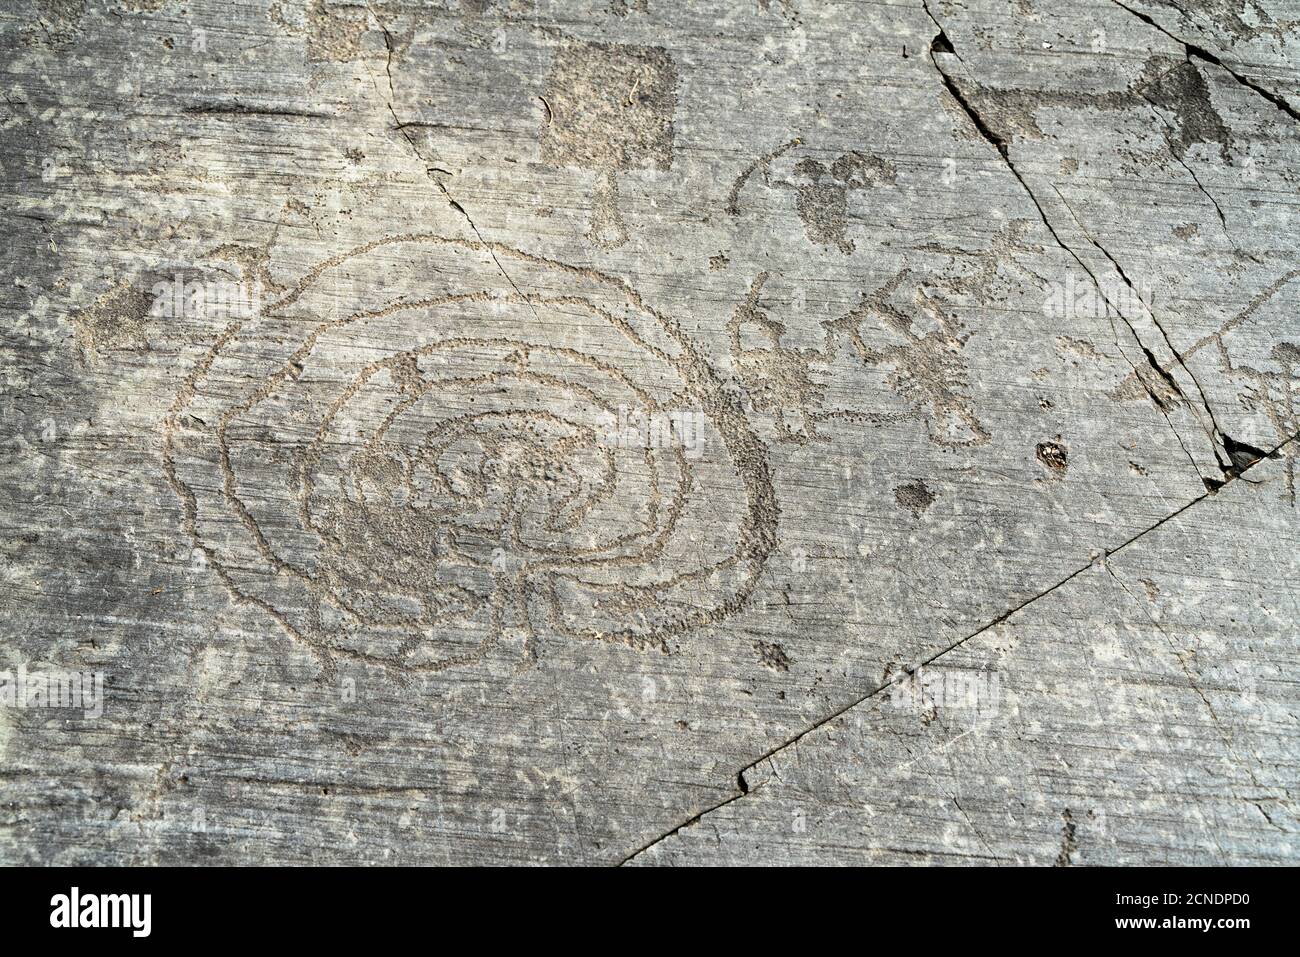 Rupestrian engravings depicting labyrinth and warriors, Naquane National Park, Capo di Ponte, Valcamonica Stock Photo